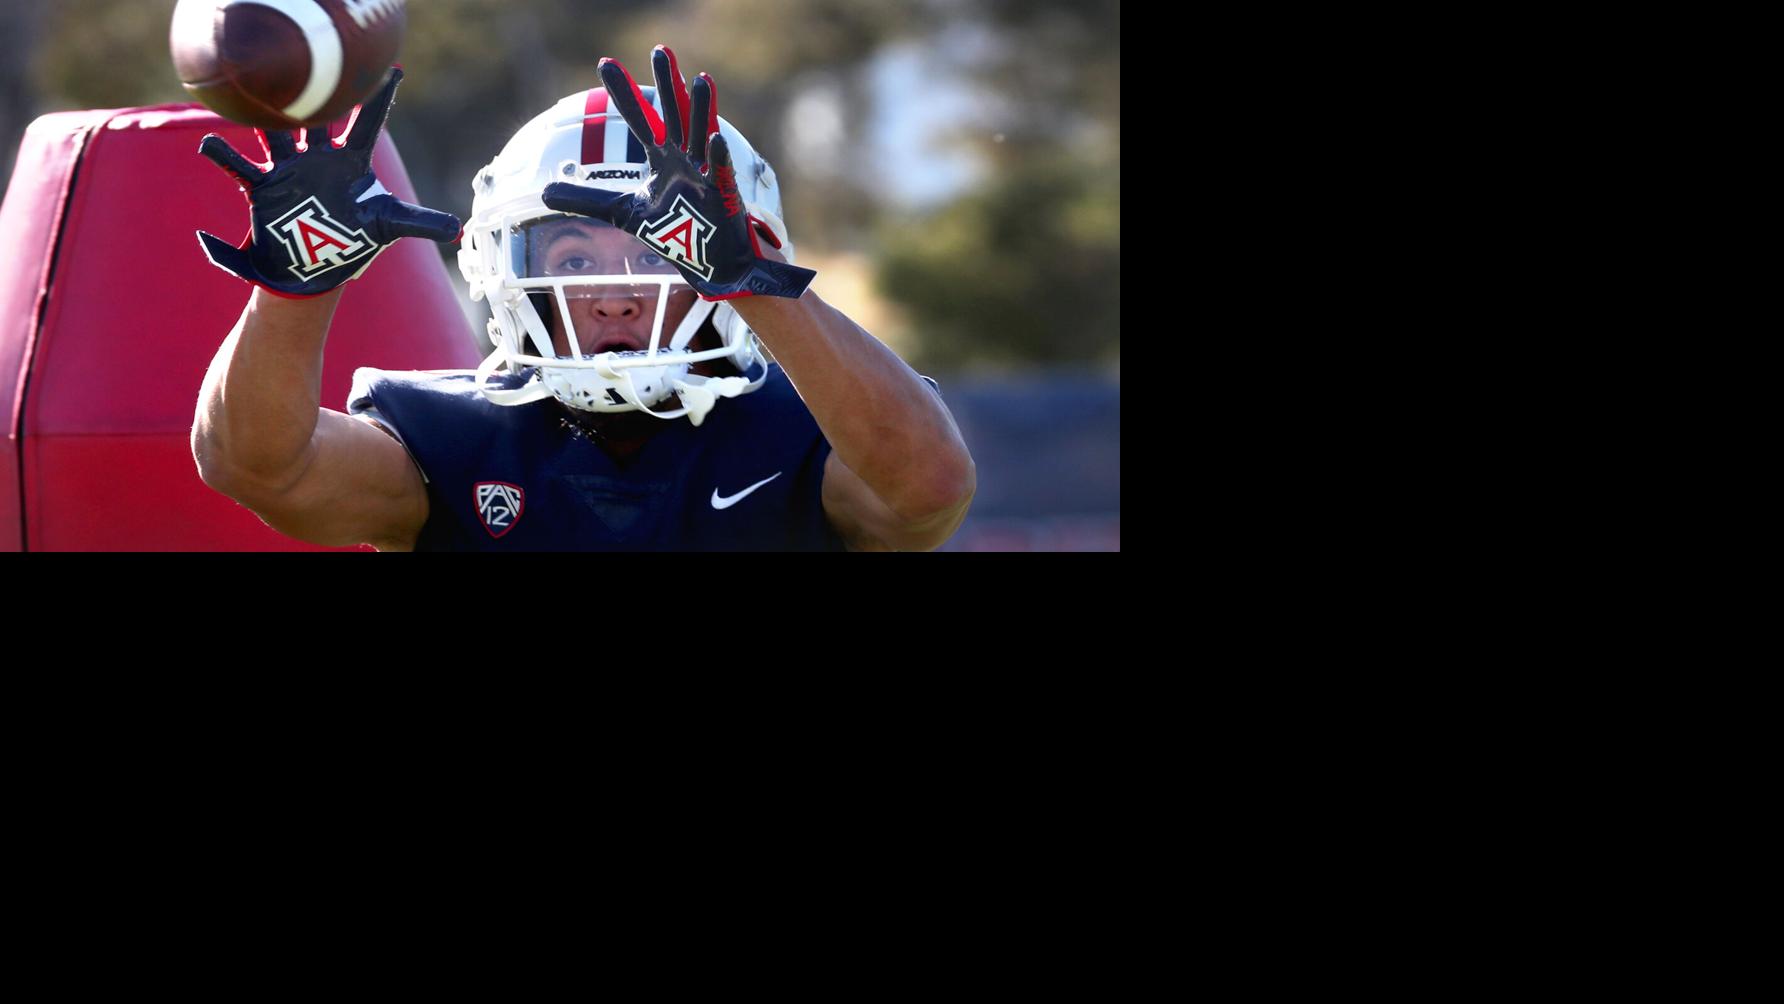 WR Tetairoa McMillan expected to be 'game-changer' for Arizona thanks to  height, jump-ball skills